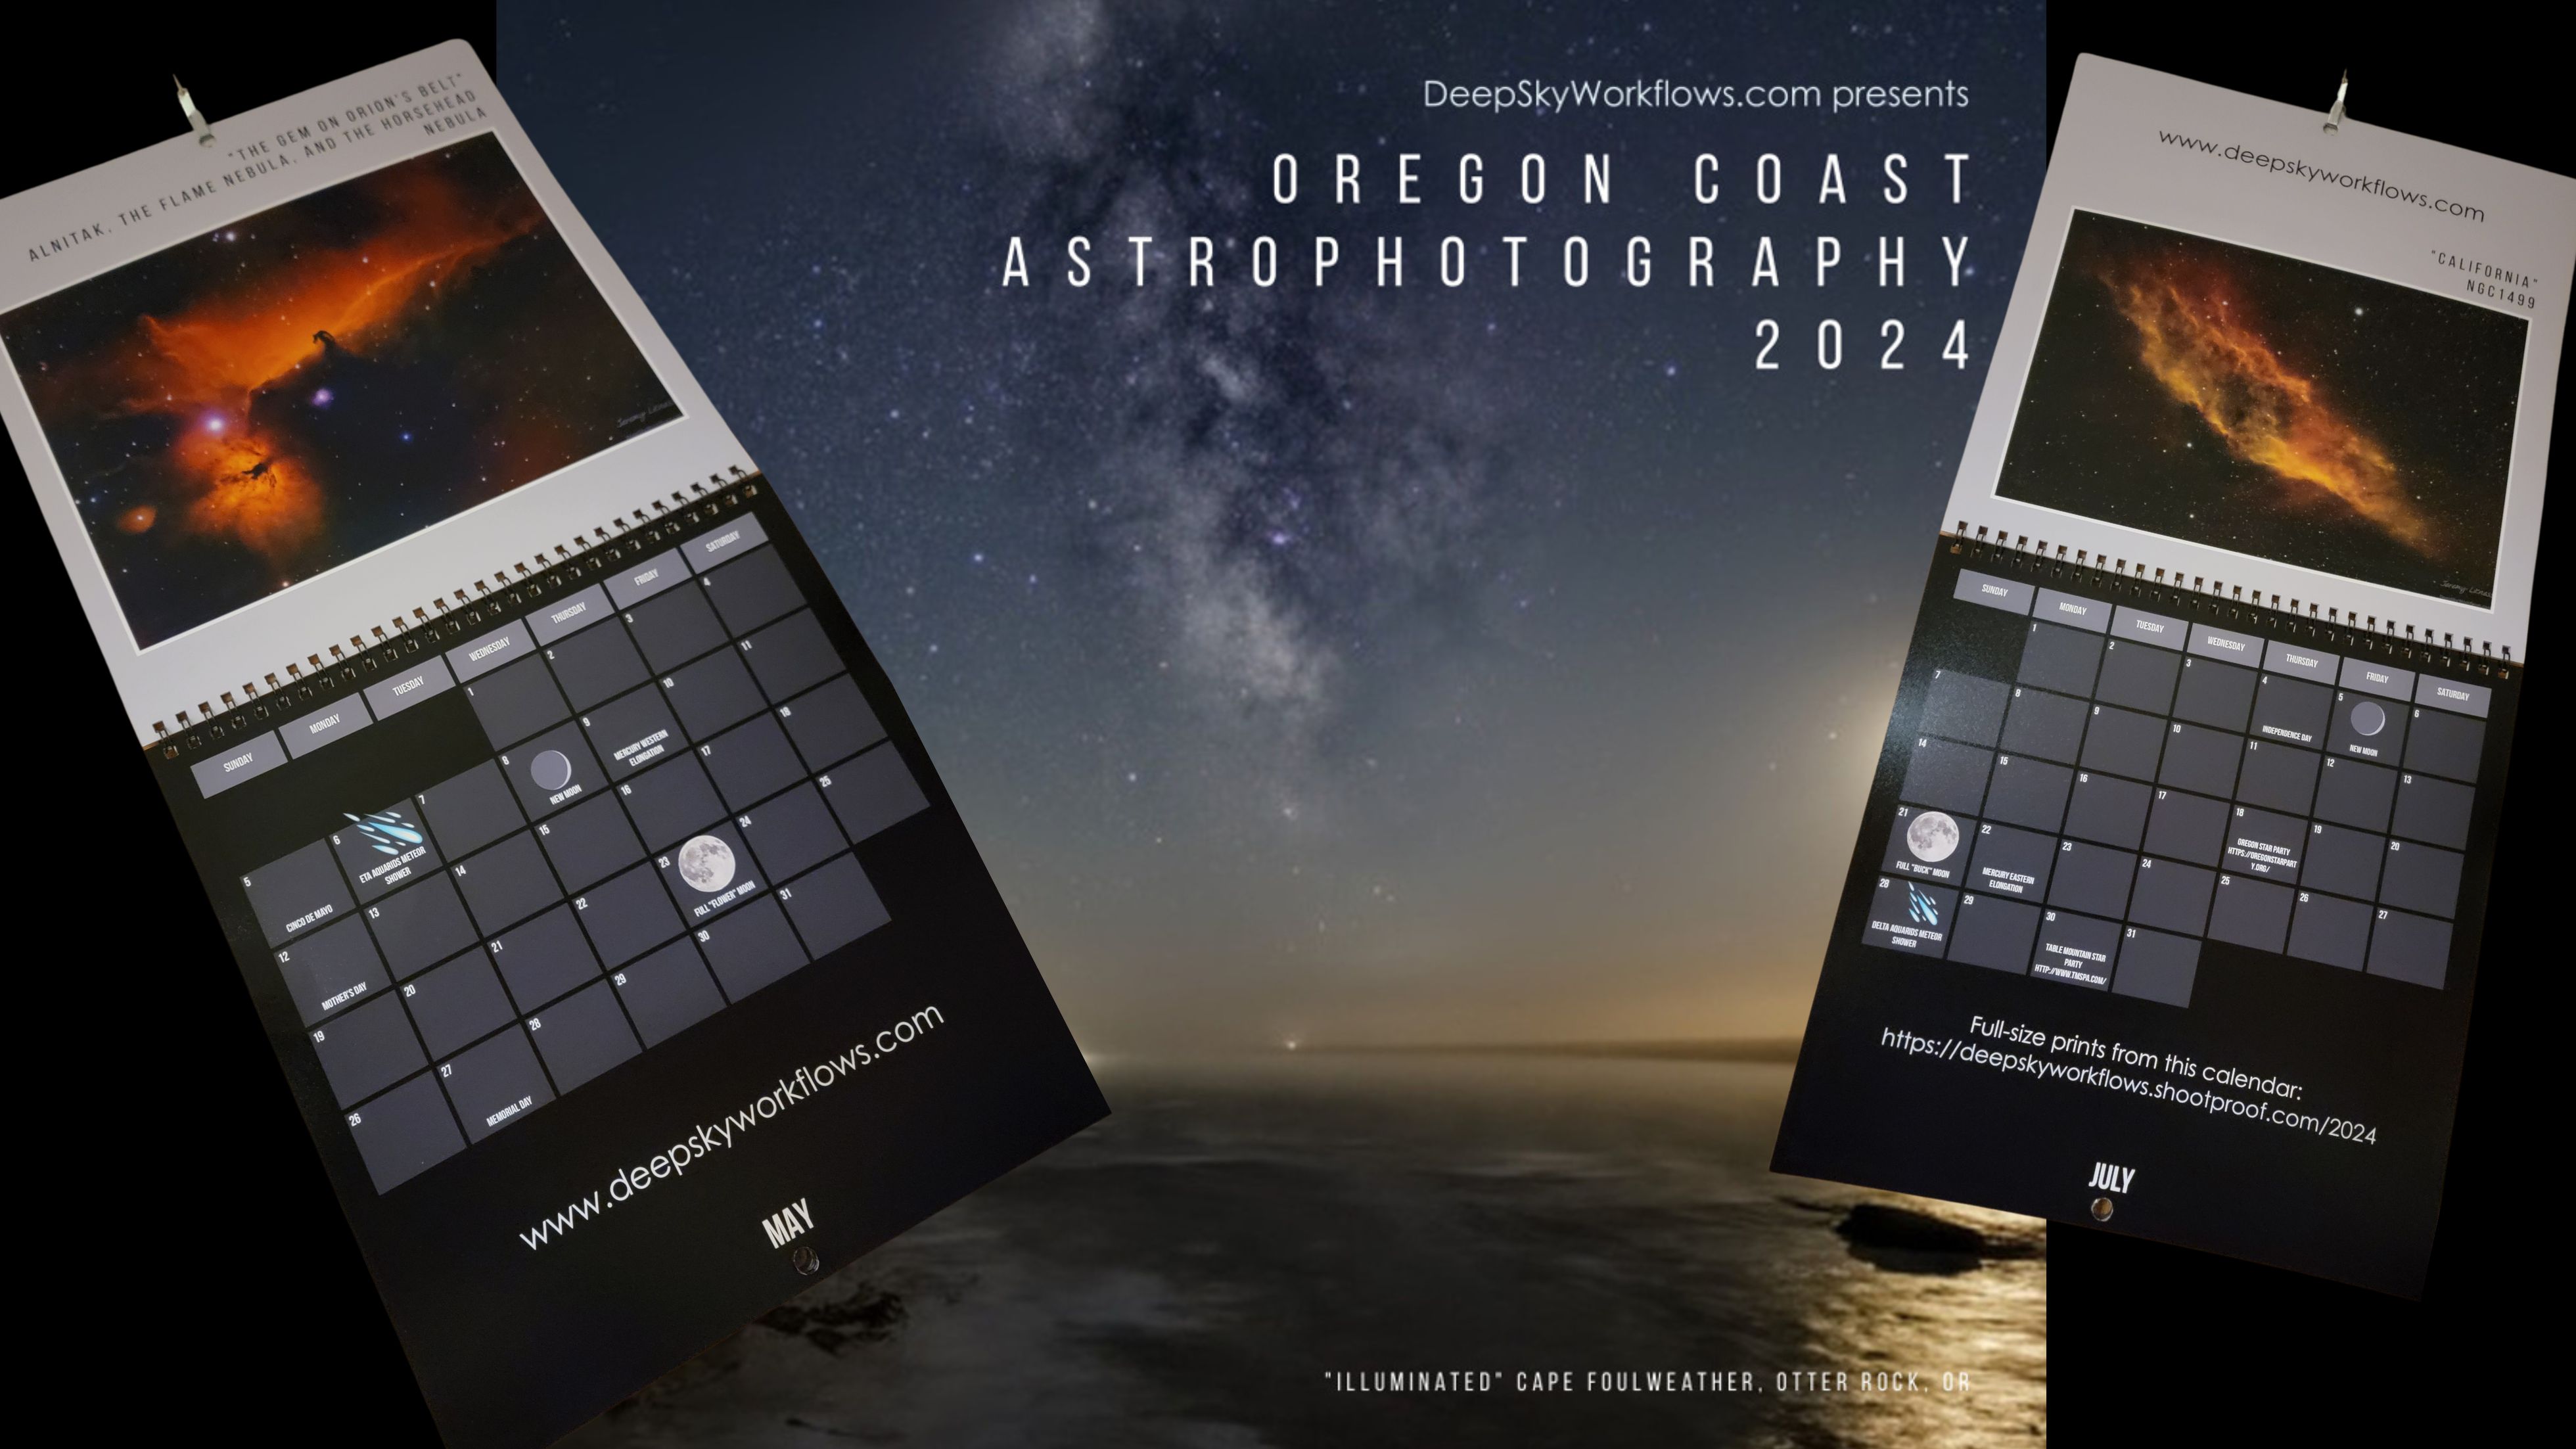 The 2024 calendar shares print-quality photographs taken either of or from the Oregon Coast between Waldport and Otter Rock. It includes important dates such as elongations, oppositions, moon phases, super-moons, meteors, and even some star parties in the Pacific Northwest.